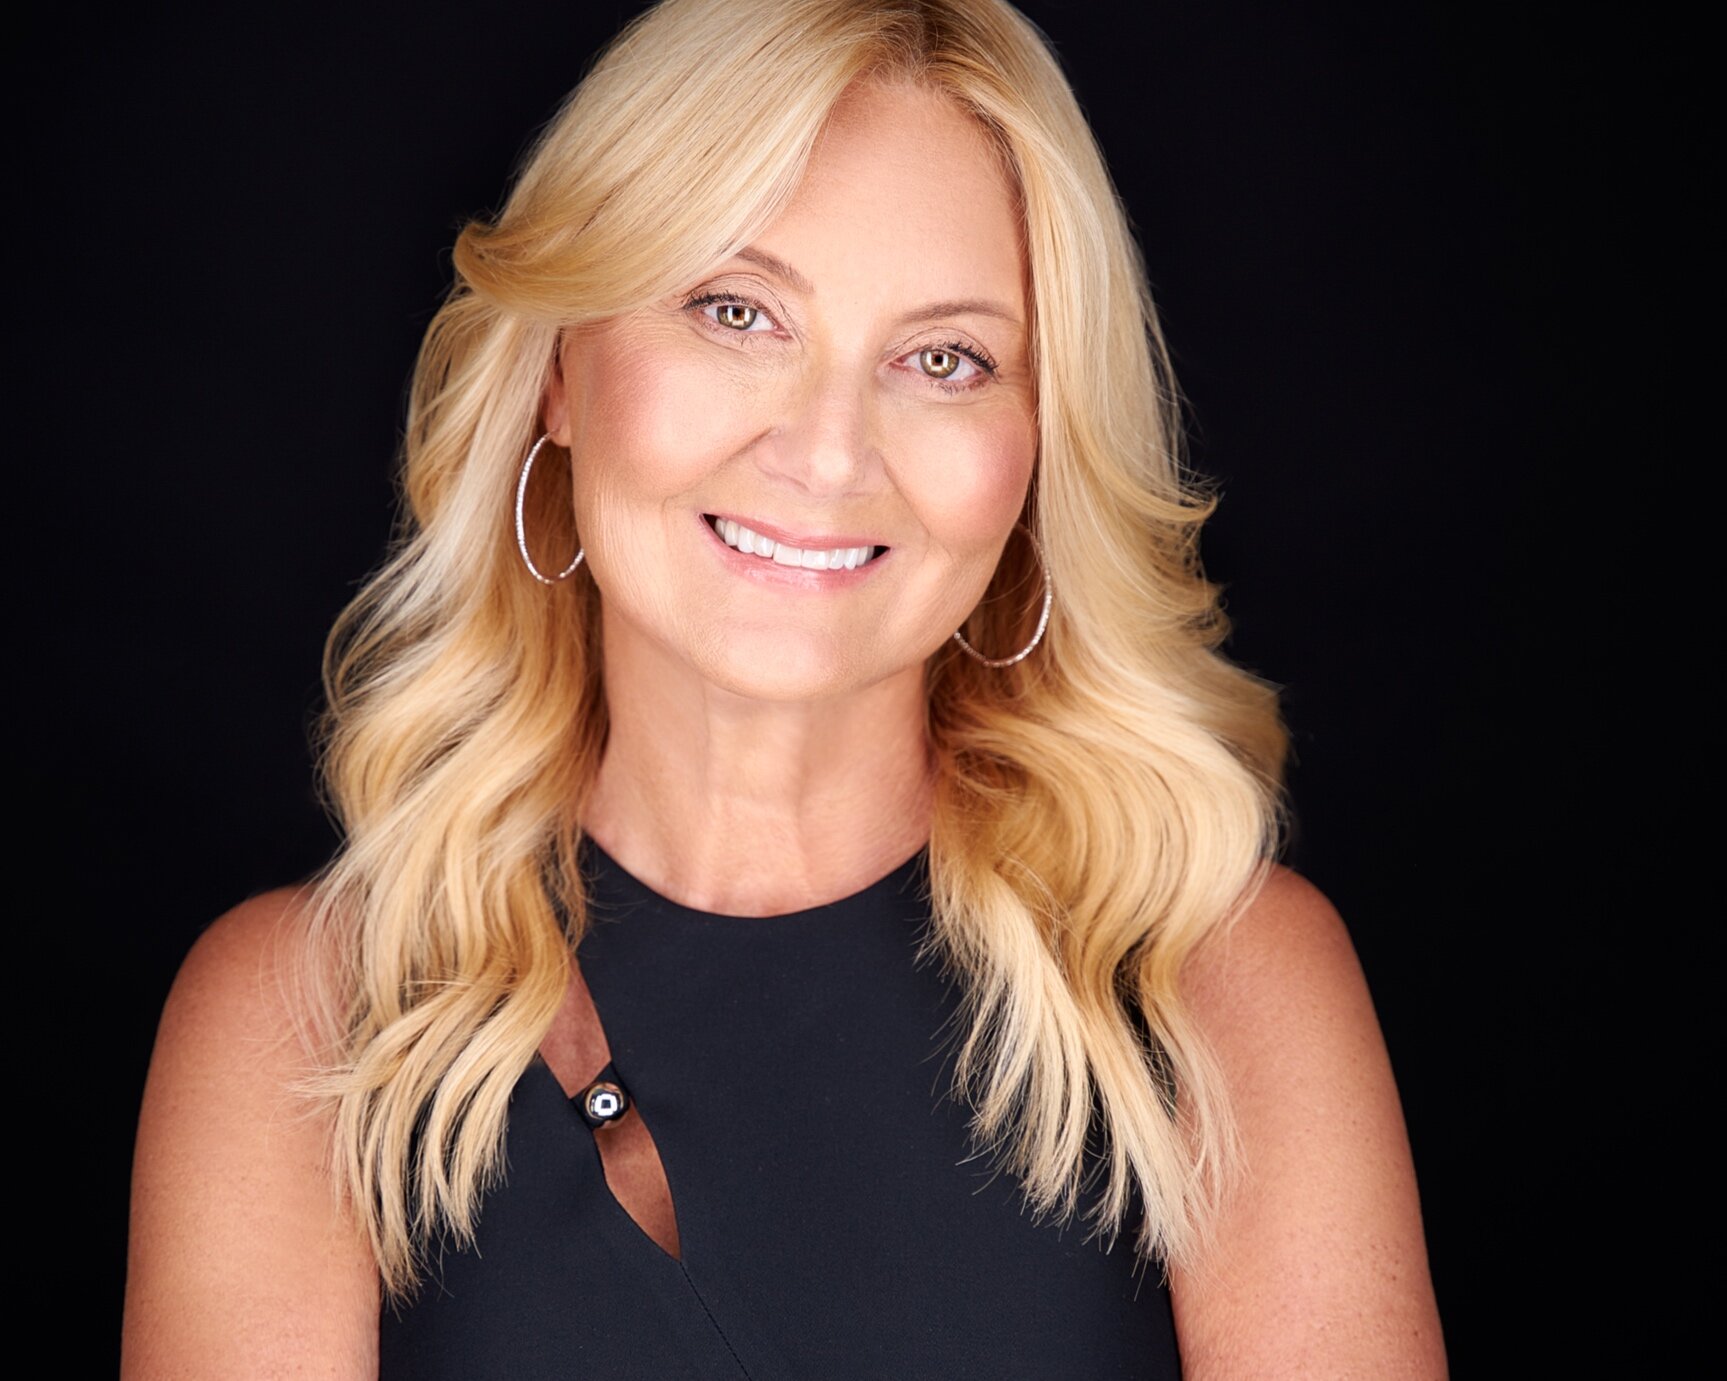 20190708_ForestHillRealEstate_Headshots0256 1_Social.png